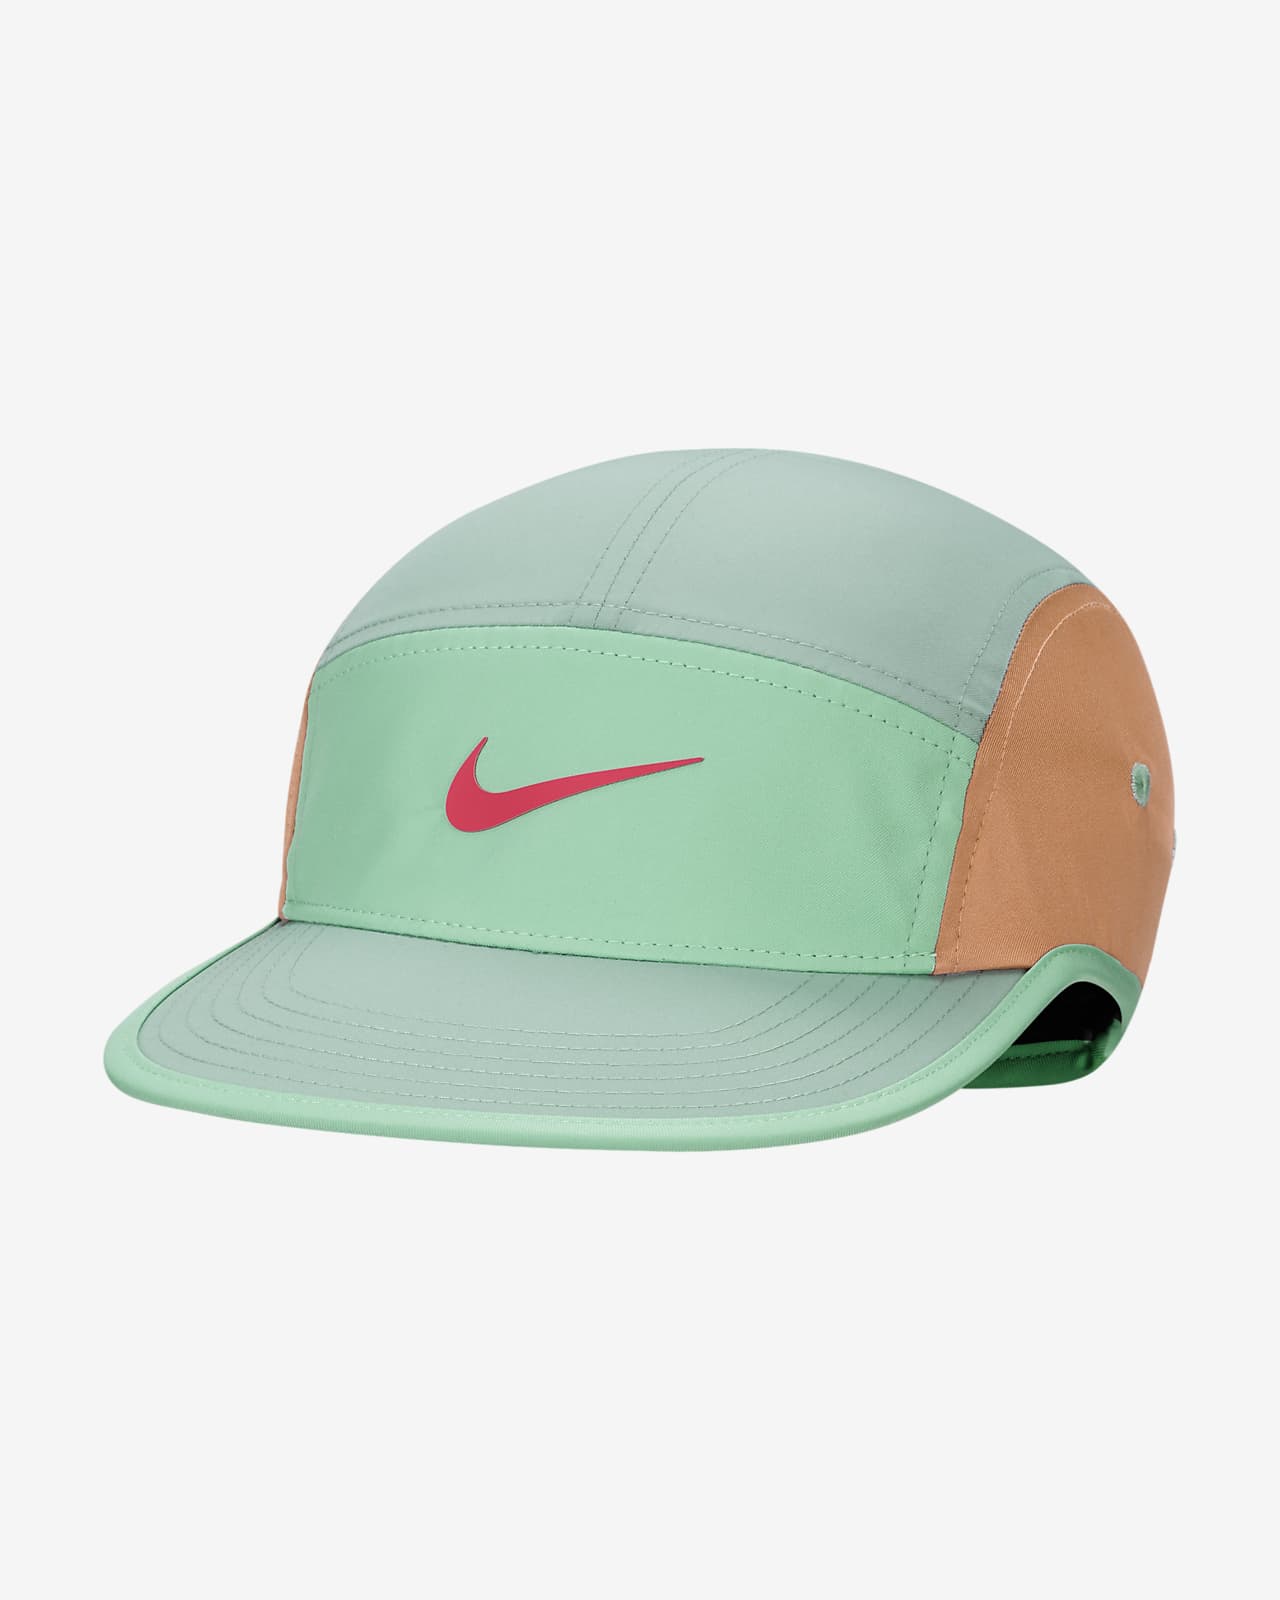 Fly Unstructured Cap. Nike.com